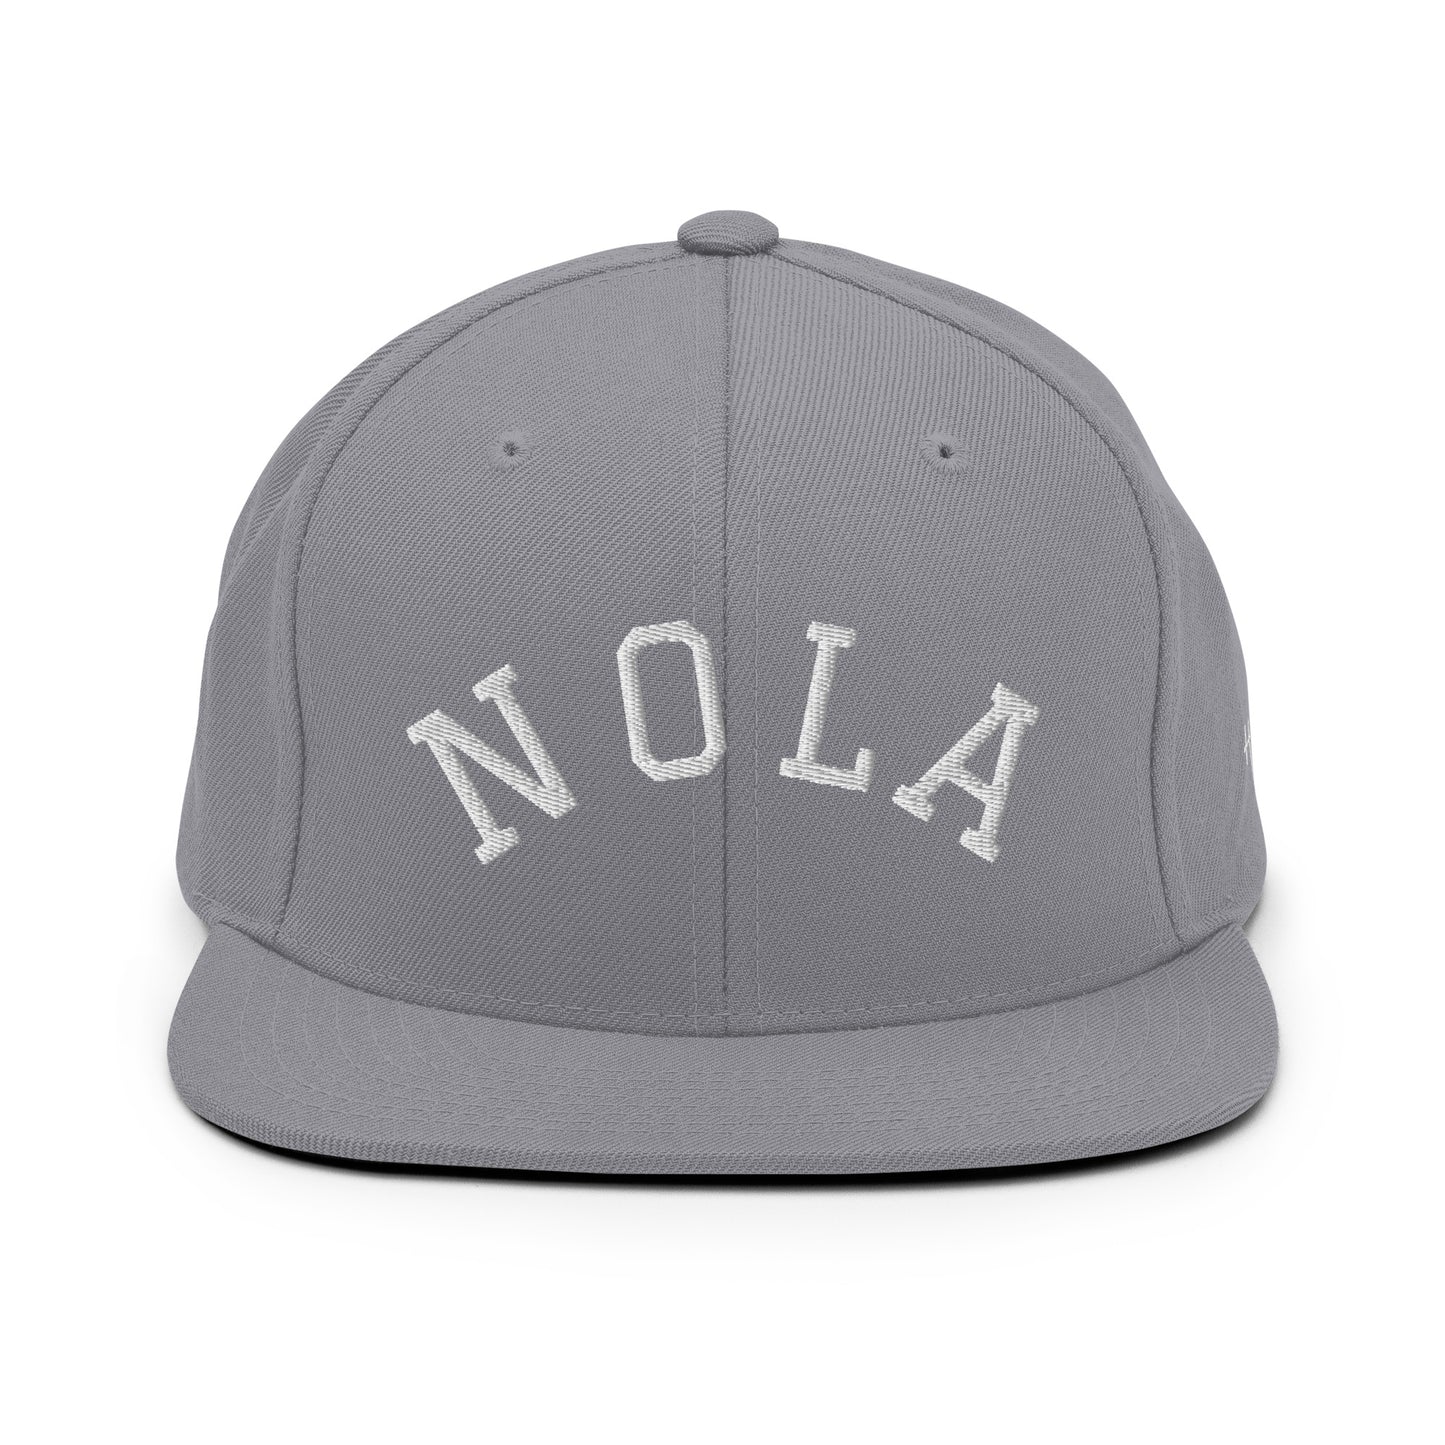 New Orleans Arch 6 Panel Snapback Hat